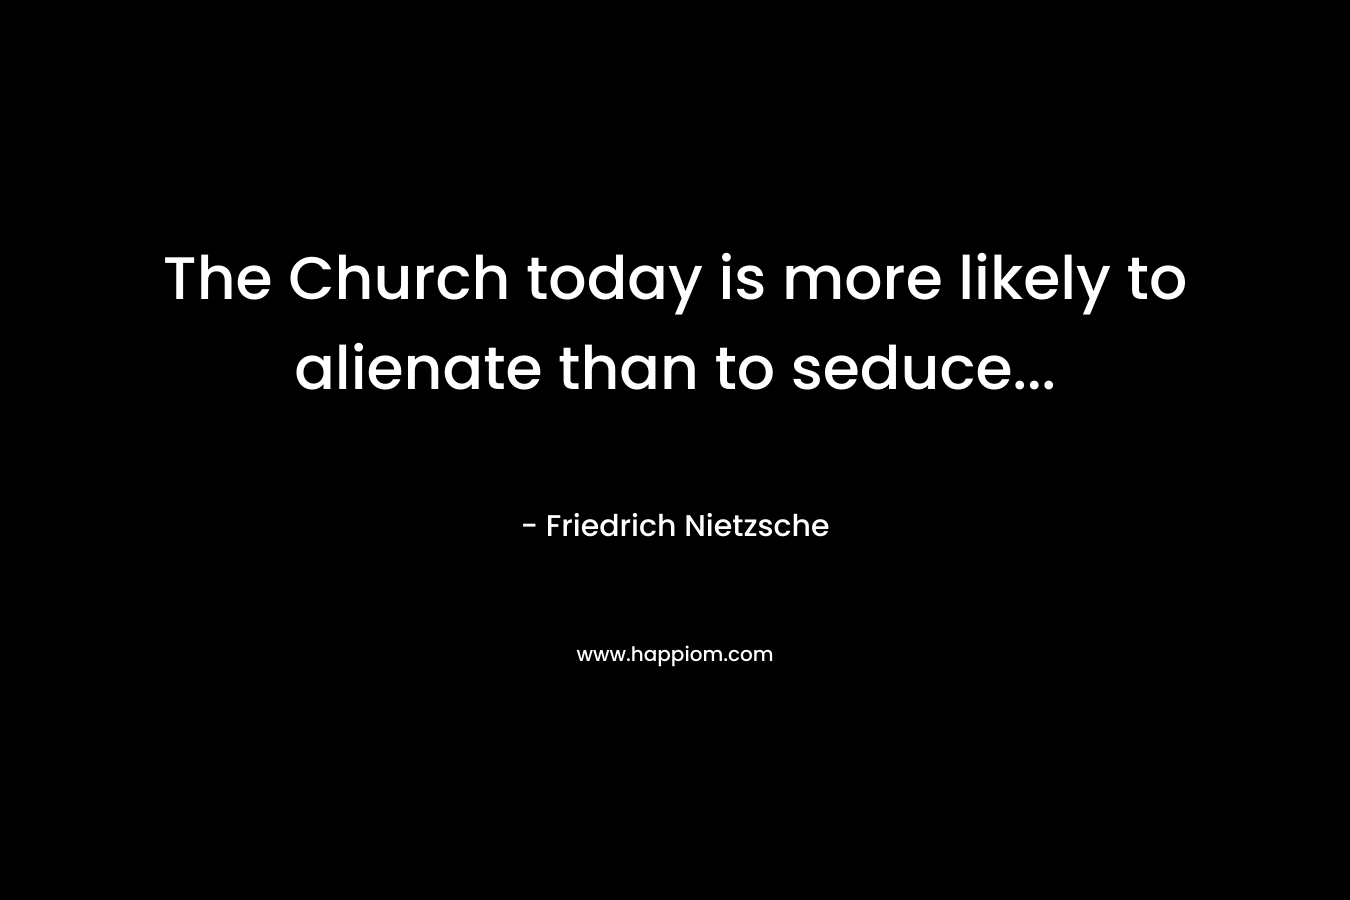 The Church today is more likely to alienate than to seduce...